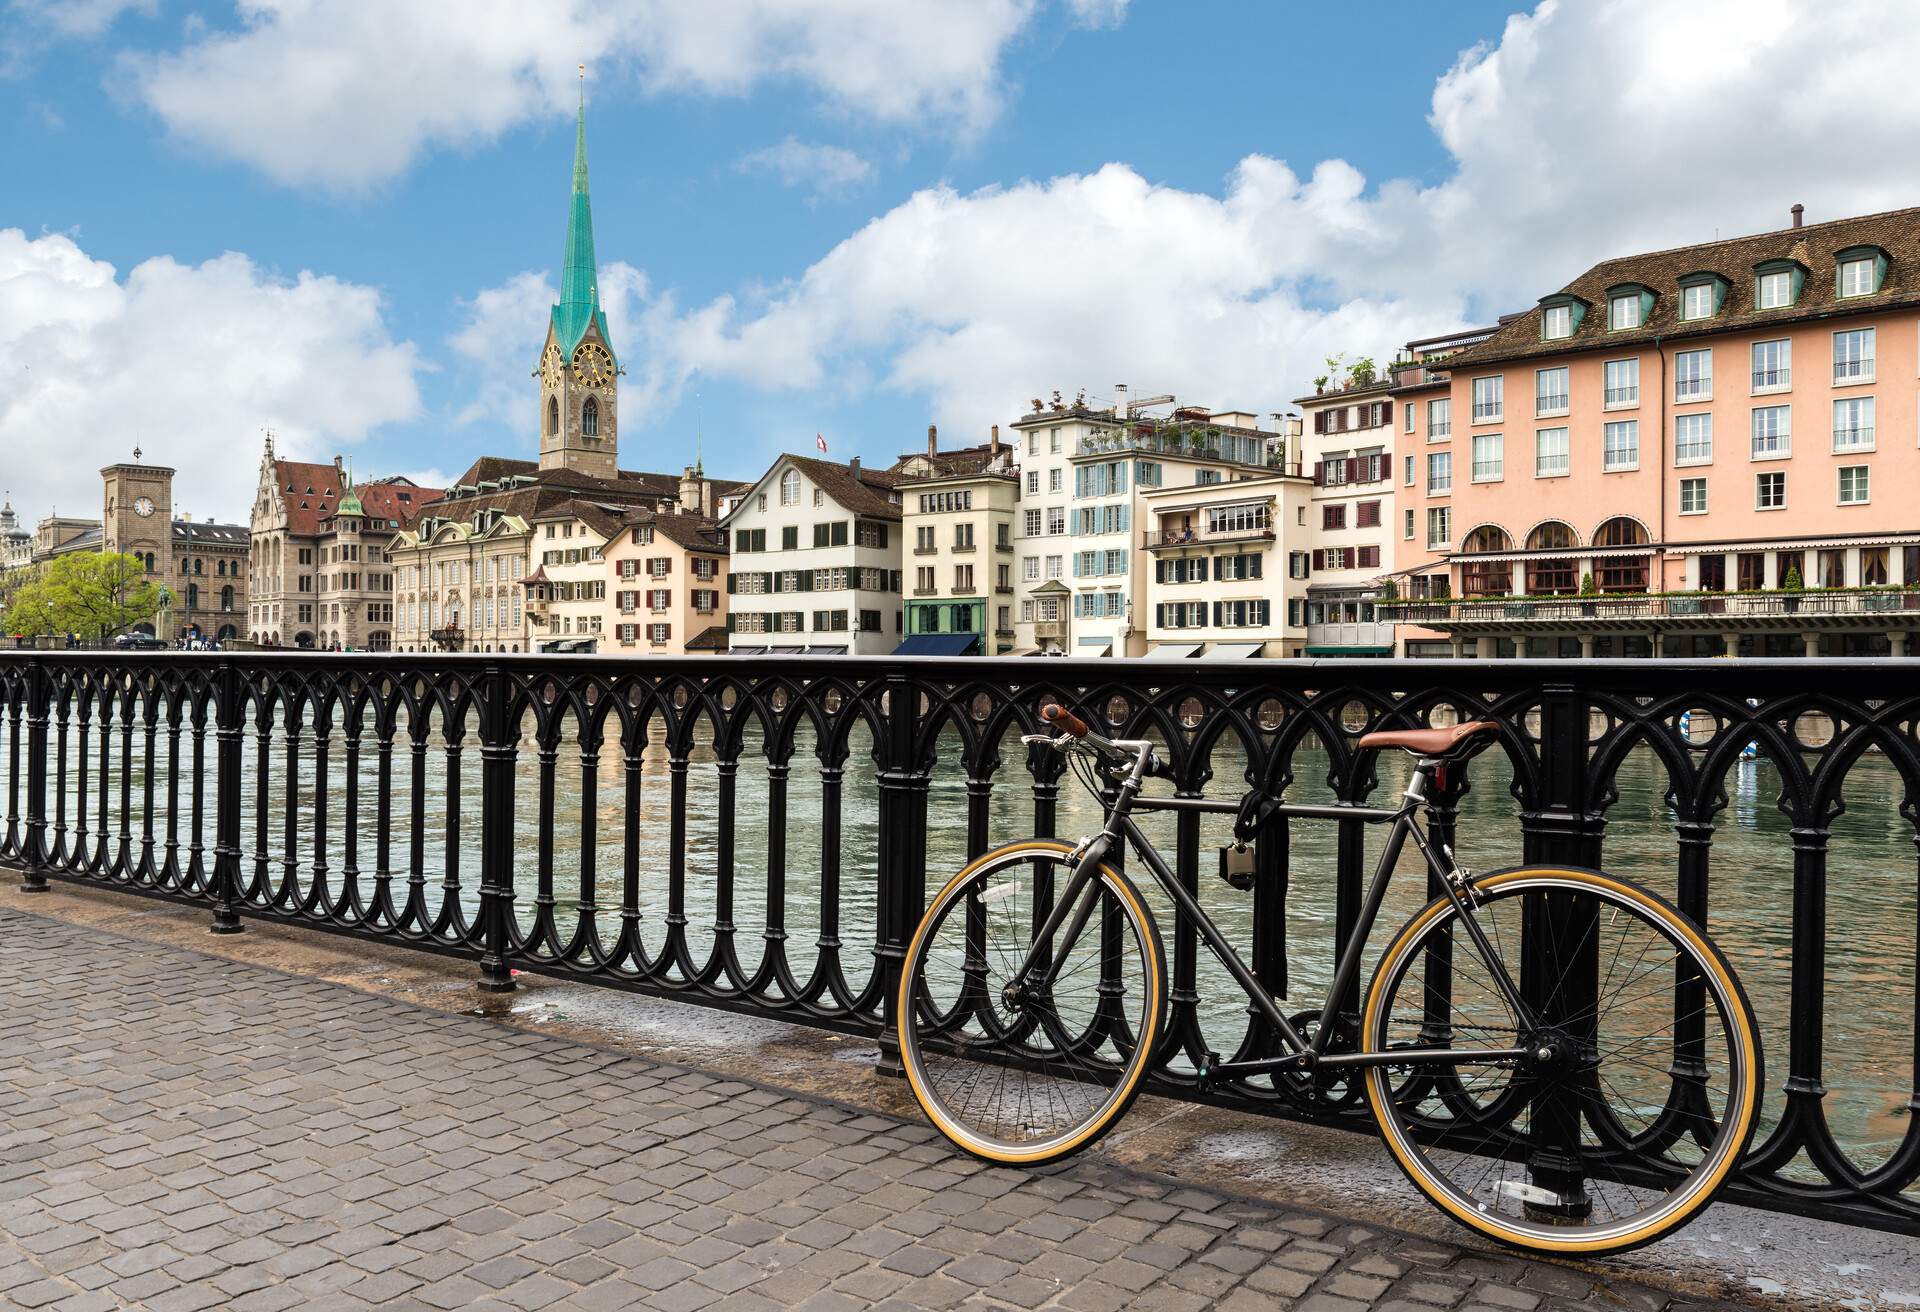 View of Zurich on Fraumunster Church and Church of St. Peter with bicycle in Zurich, Switzerland.